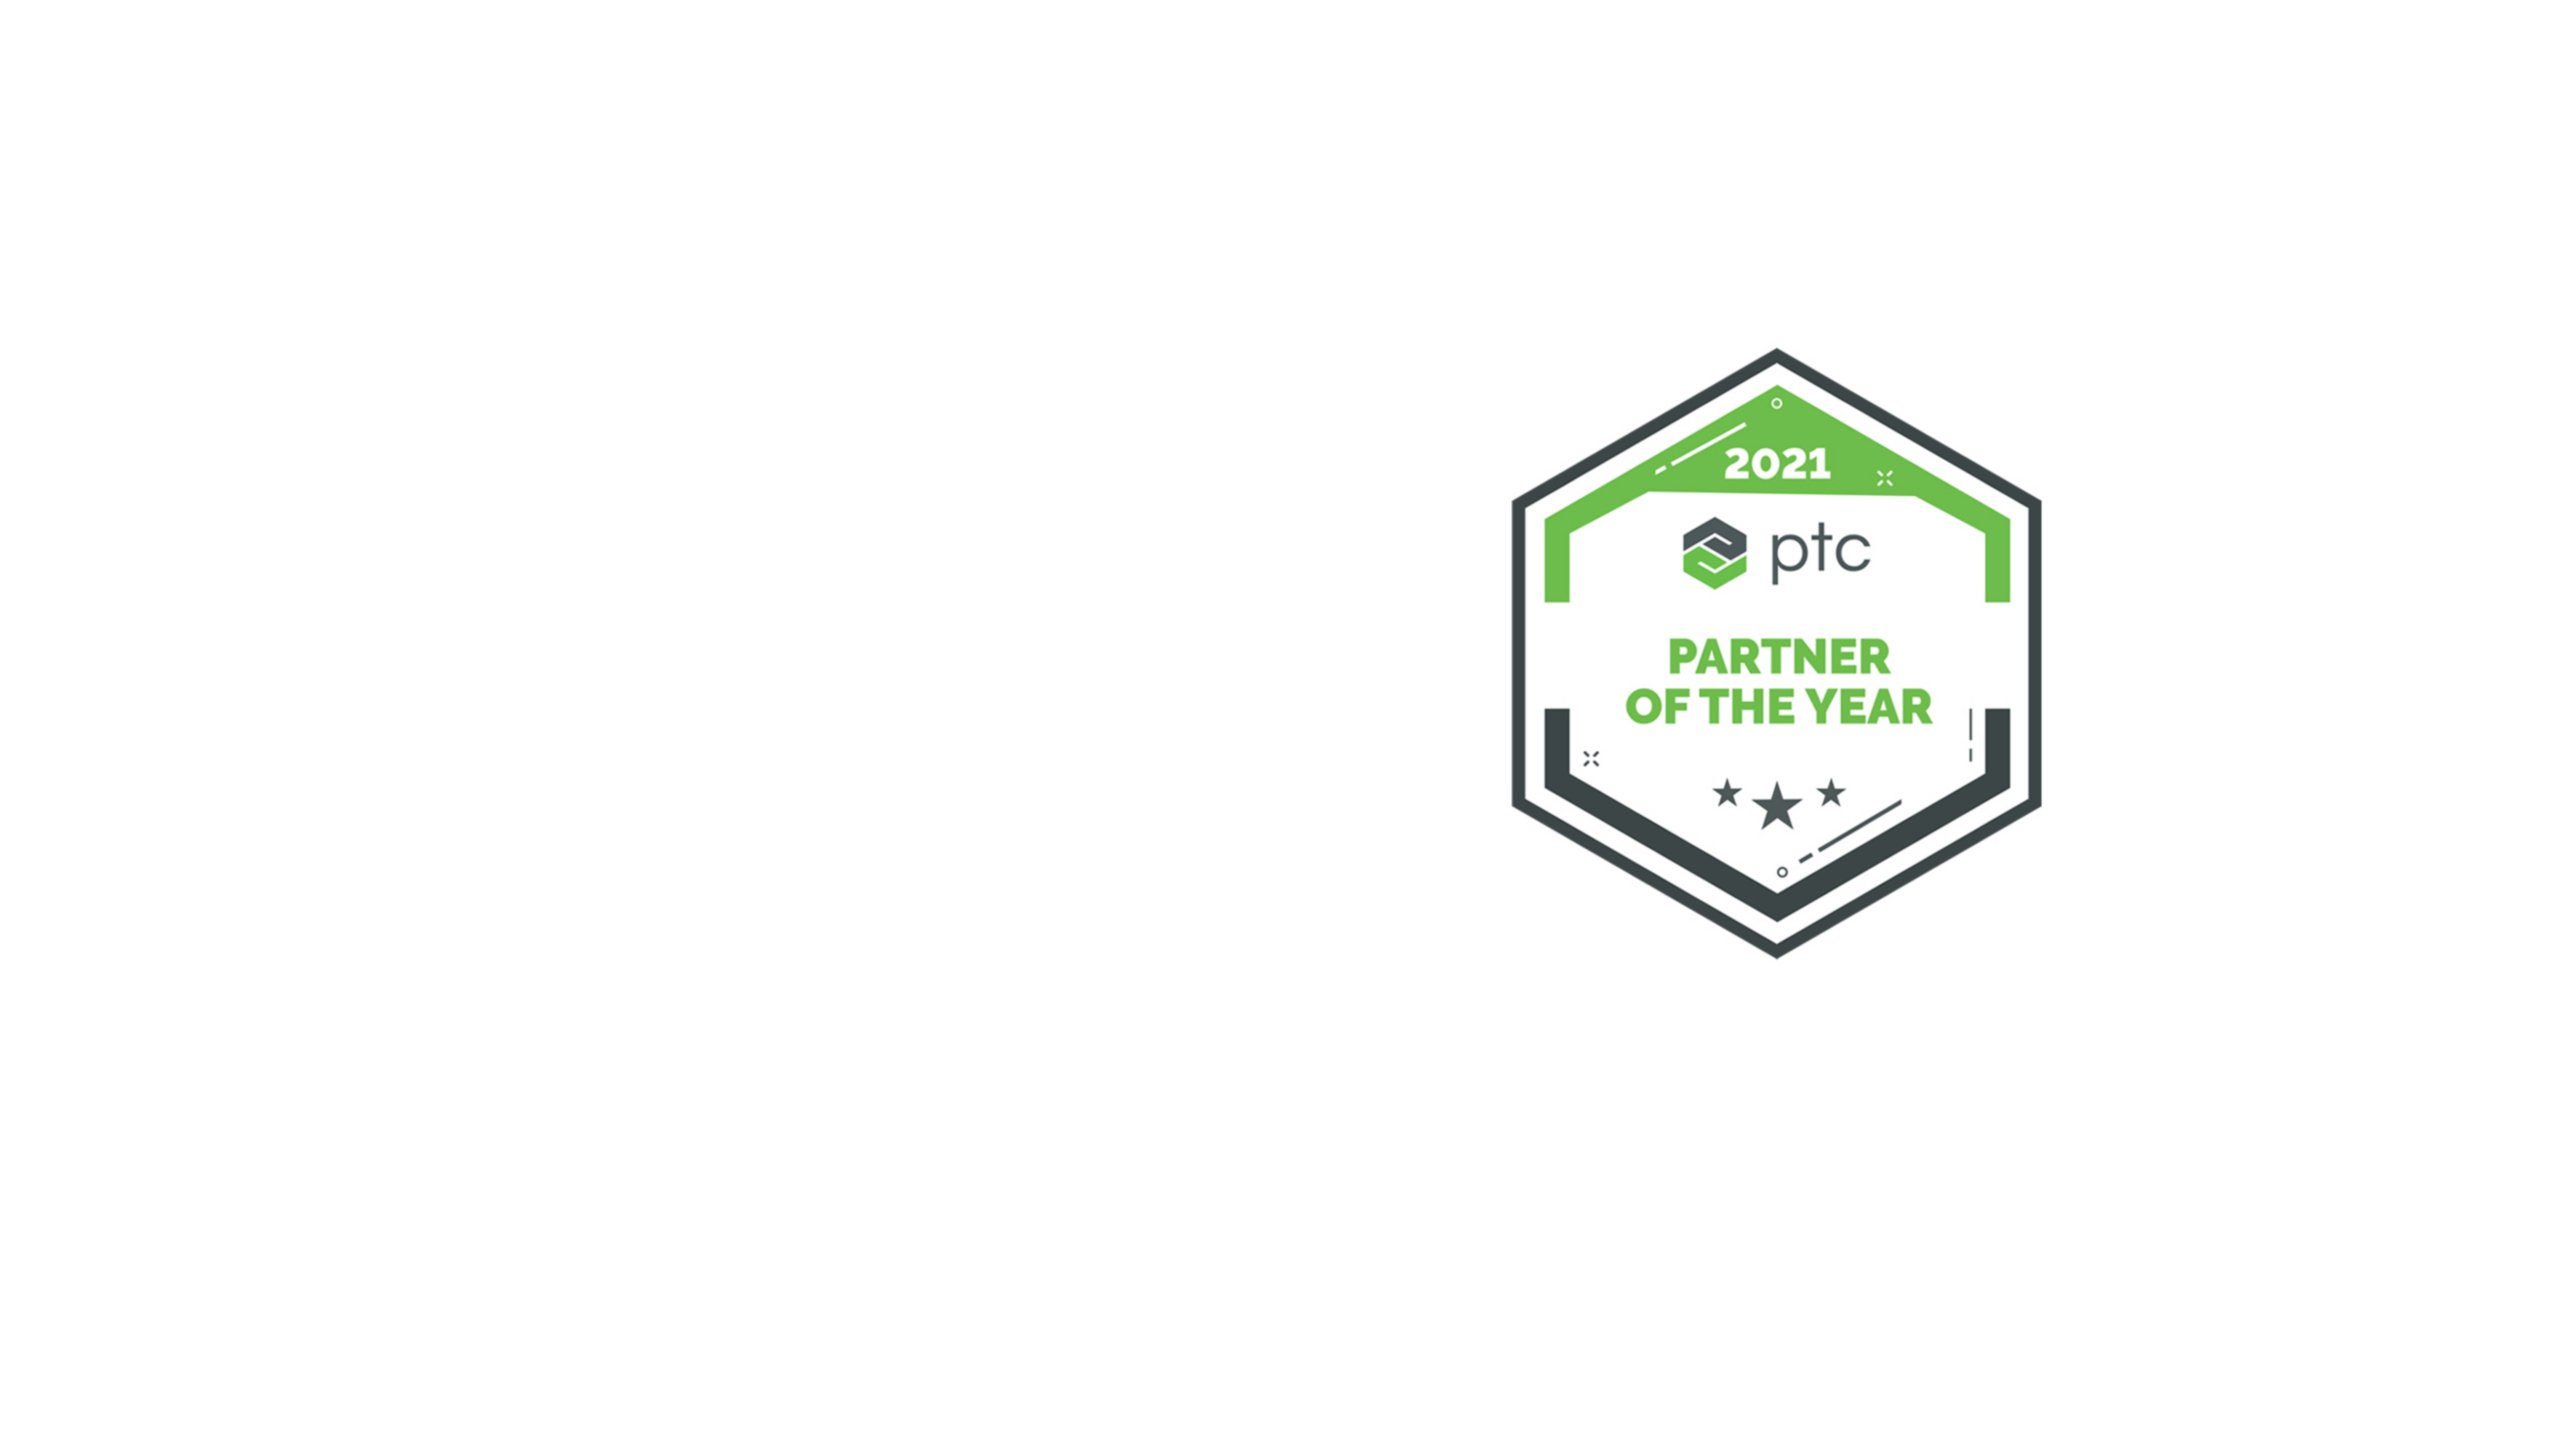 PTC Partner of the Year Rockwell Automation